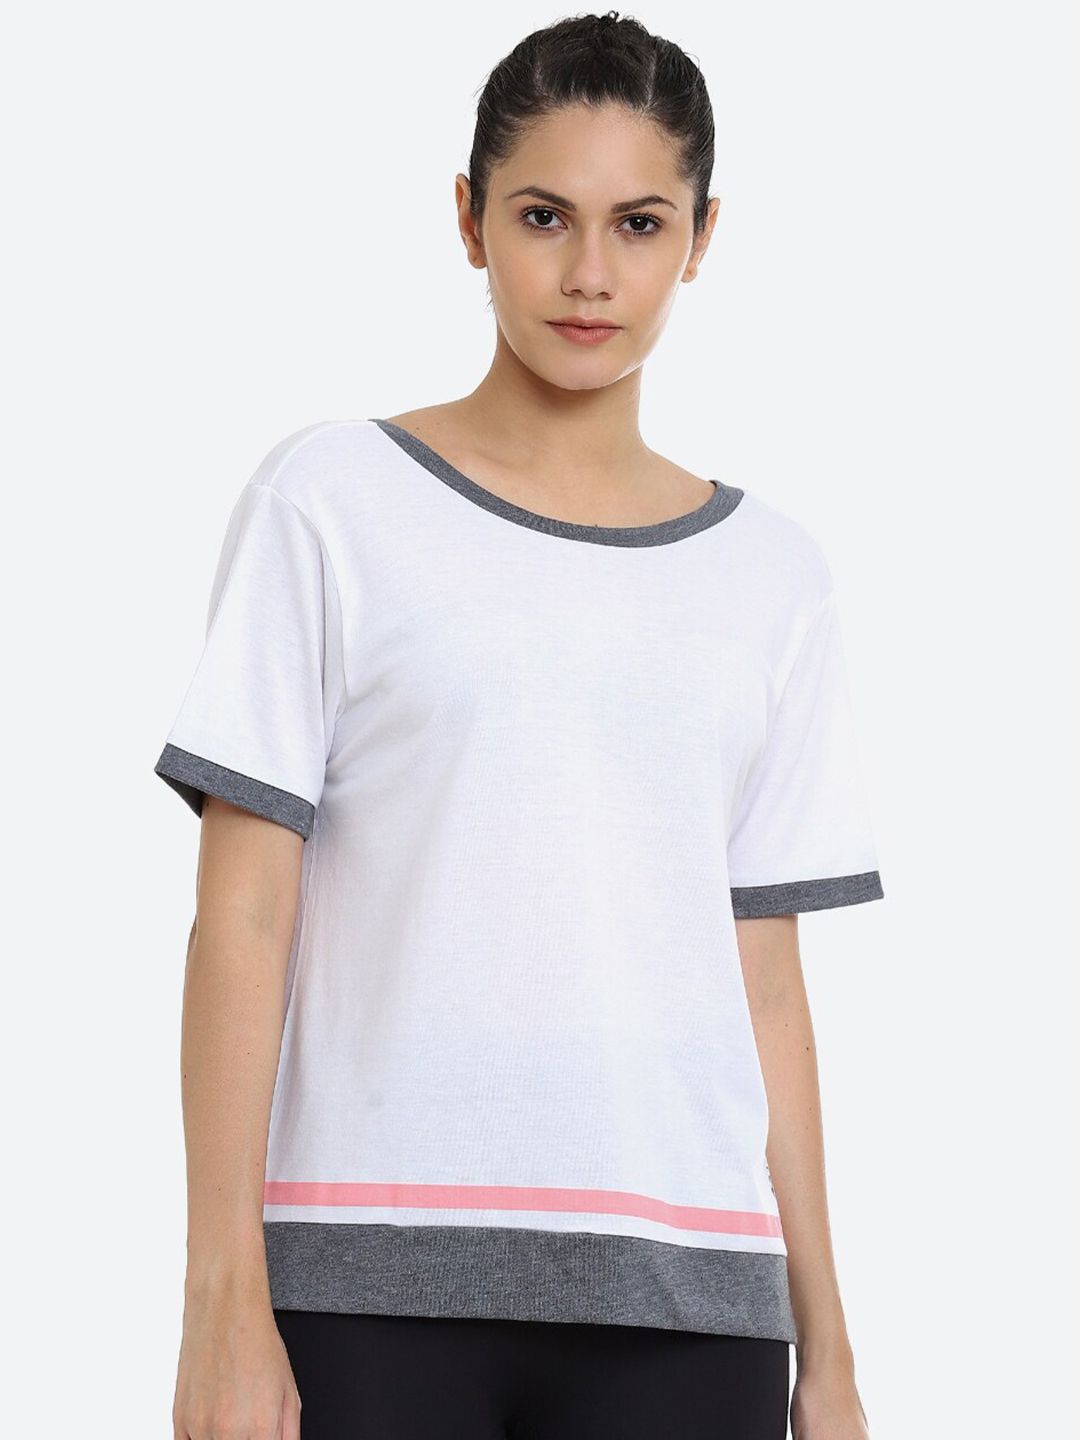 ASICS Women White W COLOR BLOCK SS Training T-shirt Price in India